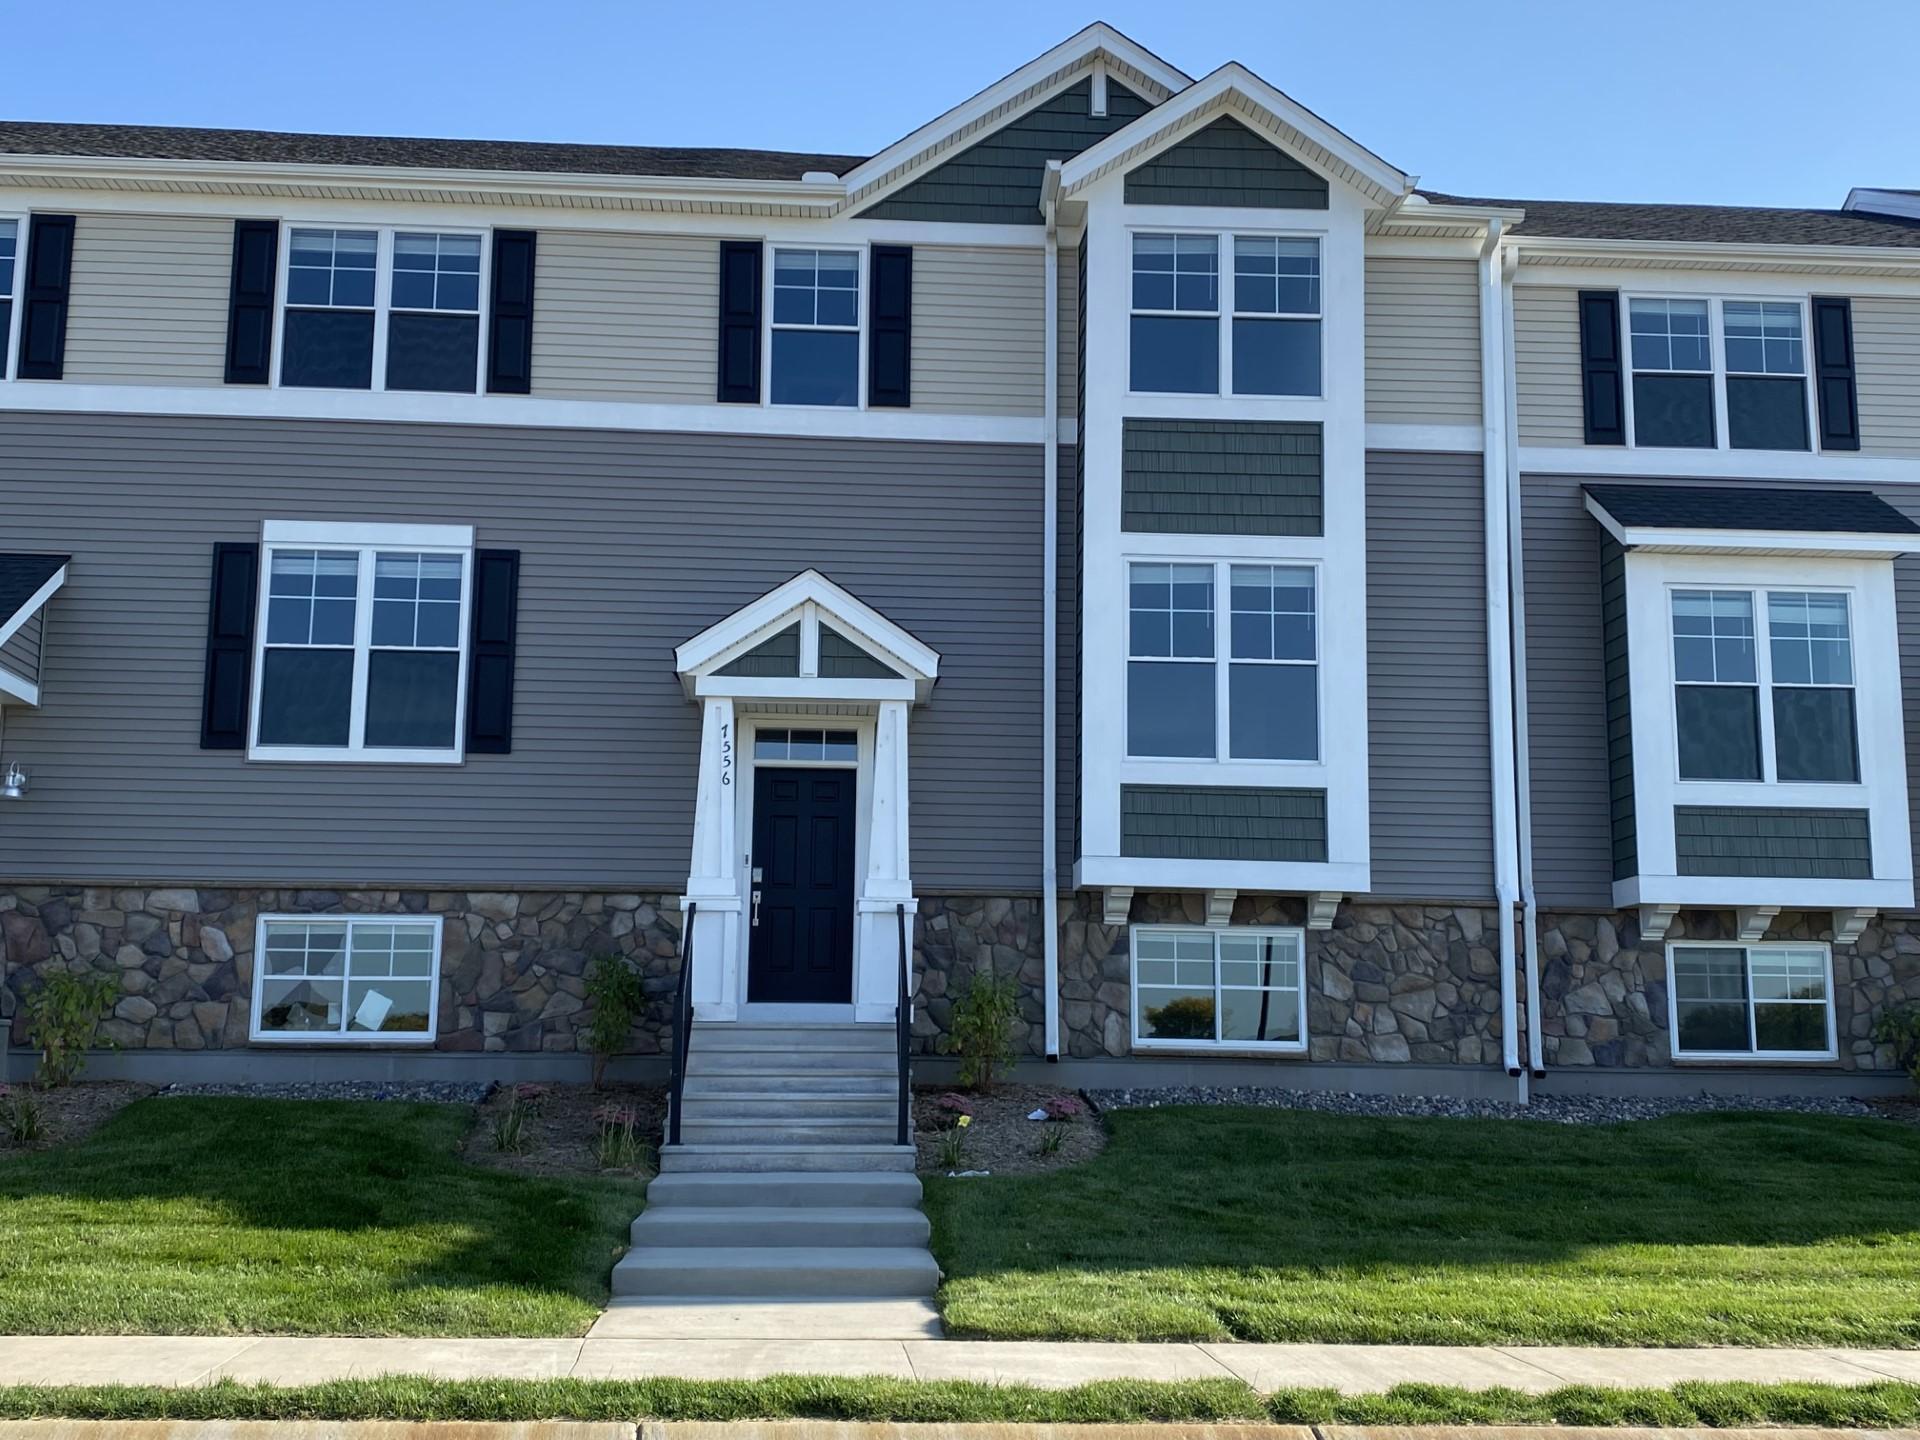 Move-in ready, 3 bedroom townhome in Oakdale's newest community! Upgraded white cabinetry, quartz countertops and slate appliances with a gas range and beautiful view of the wetland!